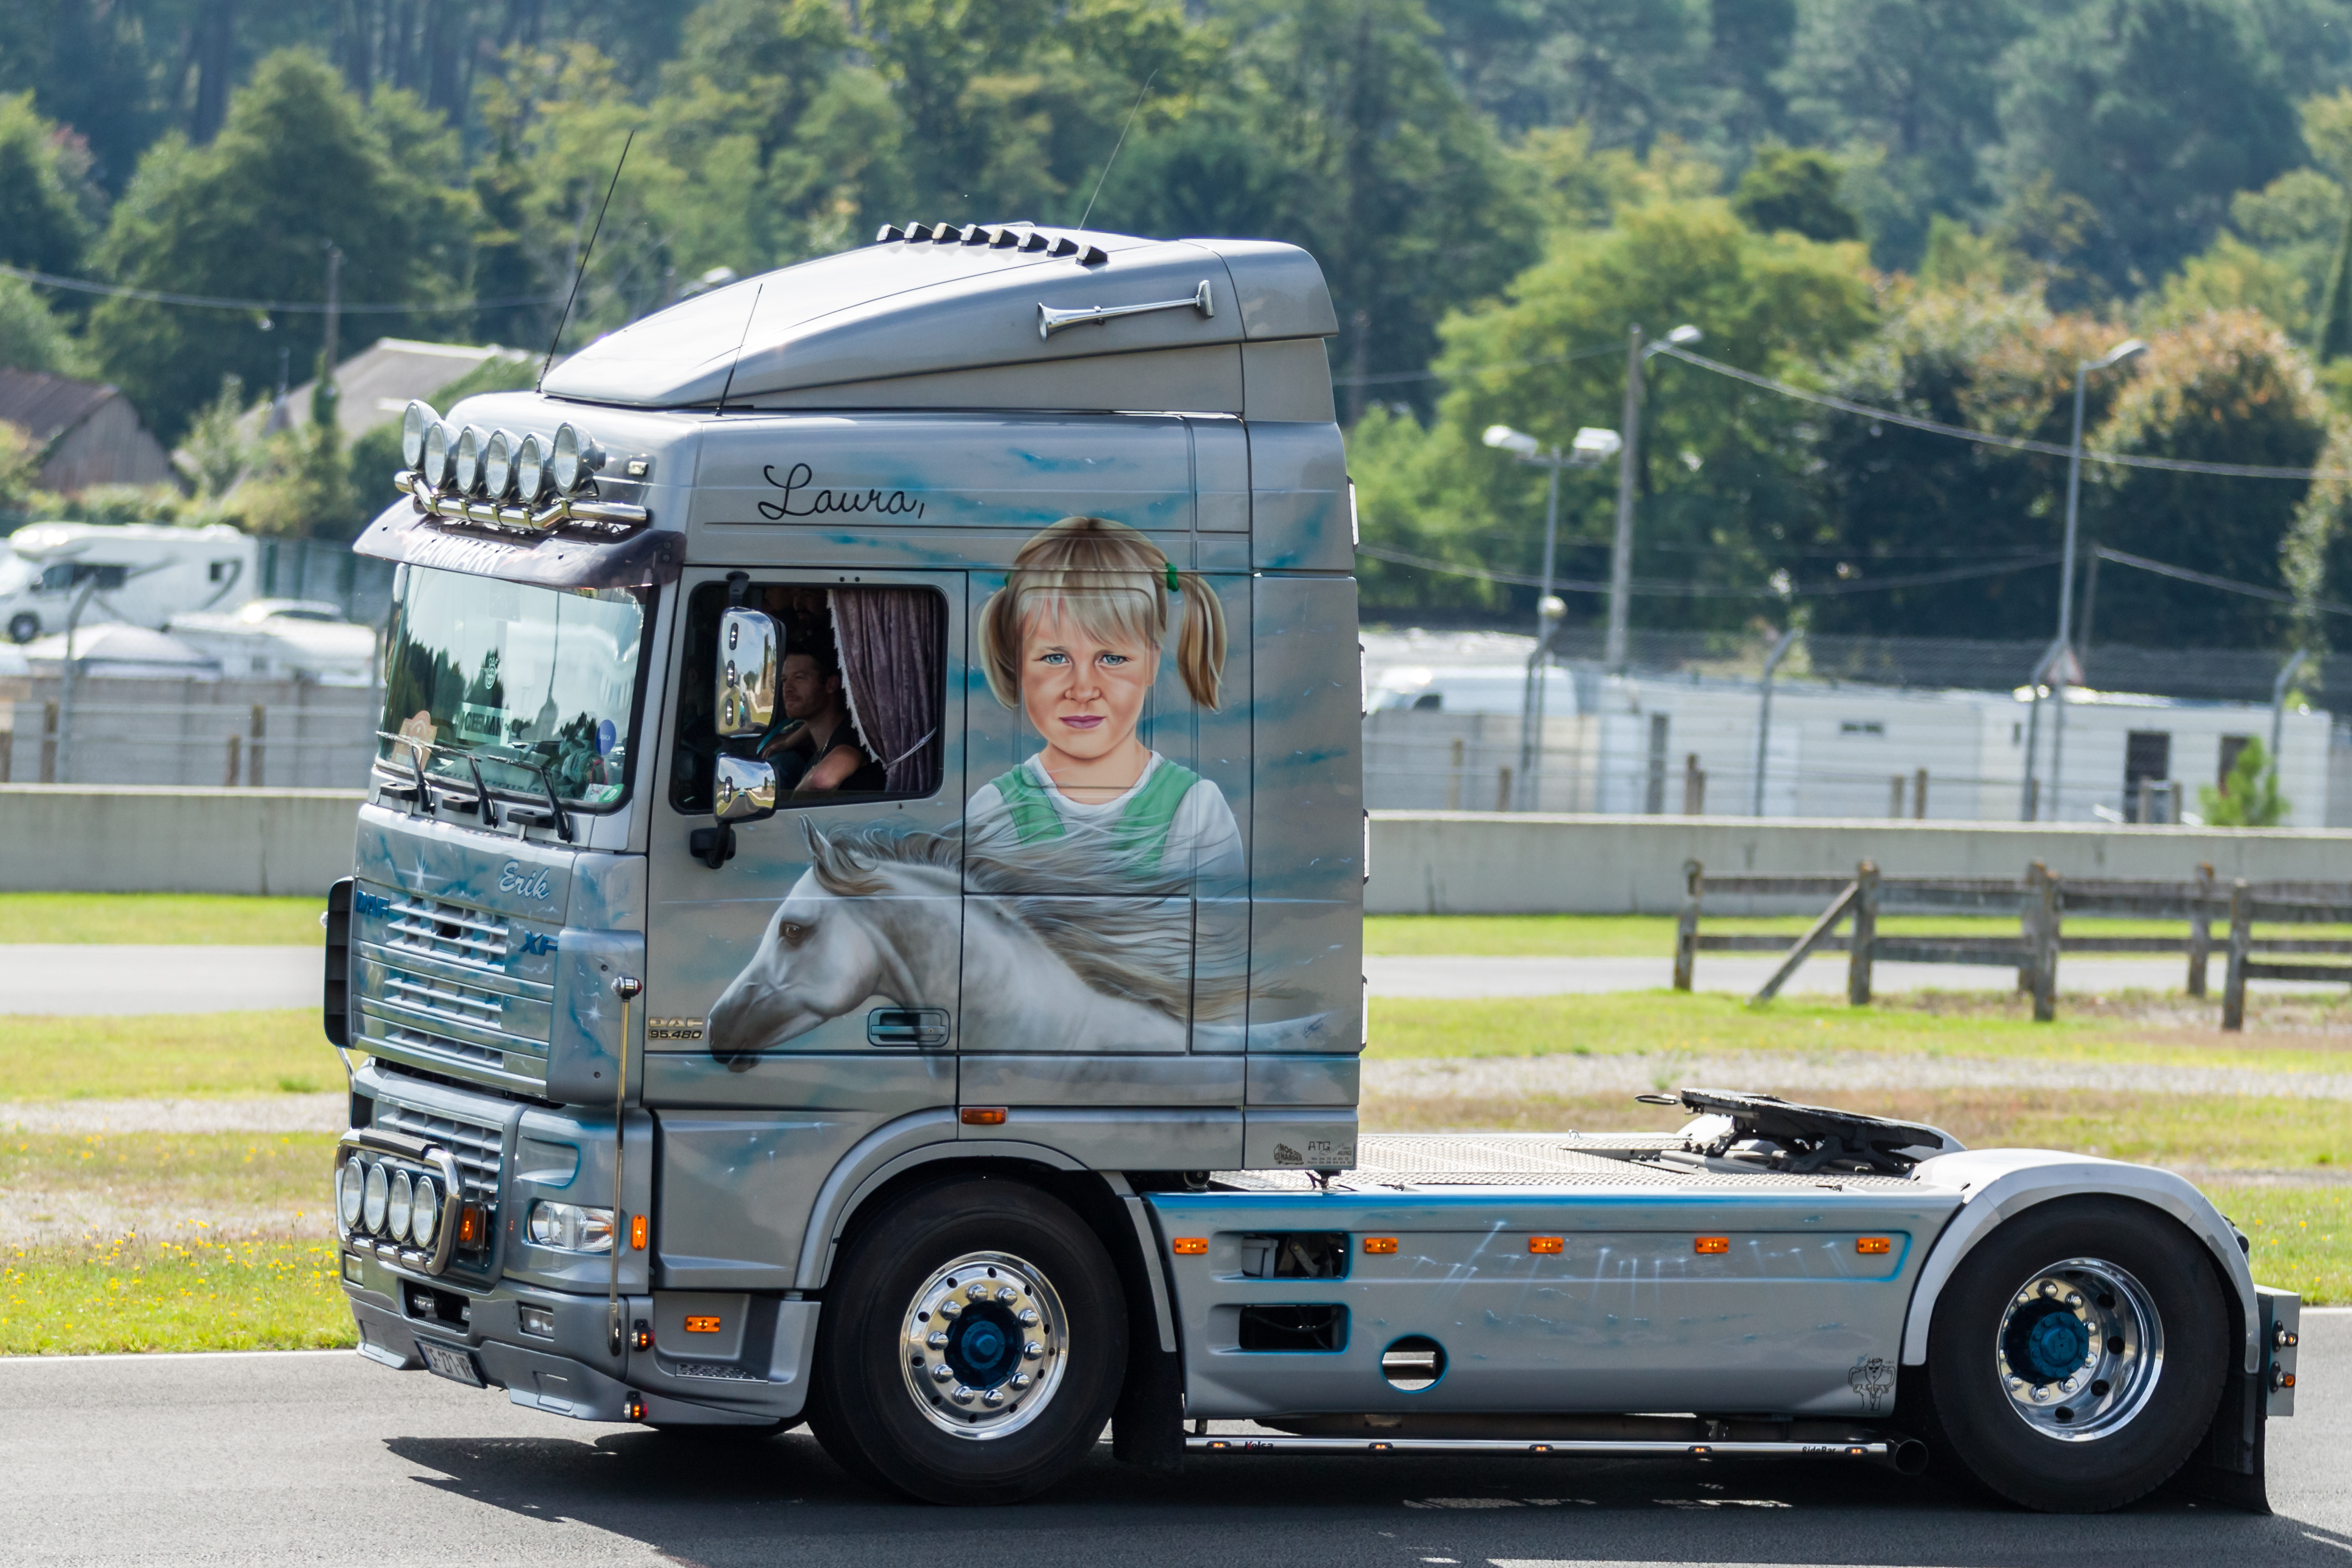 Daf Truck Pictures High Resolution Photo Galleries To